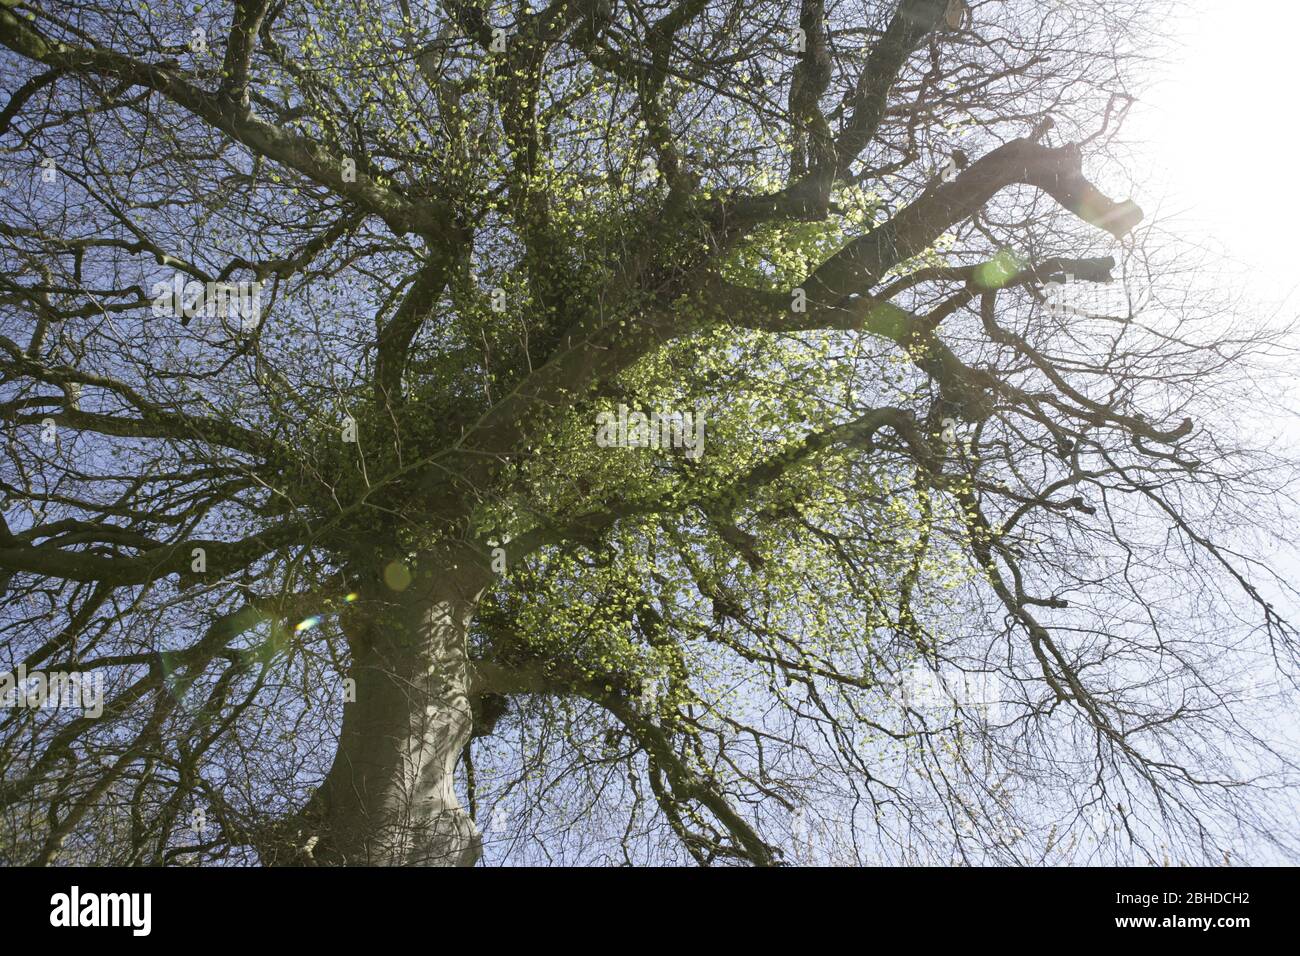 Upward sky view of mature Beech tree trunk and branches against sunlit sky during Spring-time Stock Photo